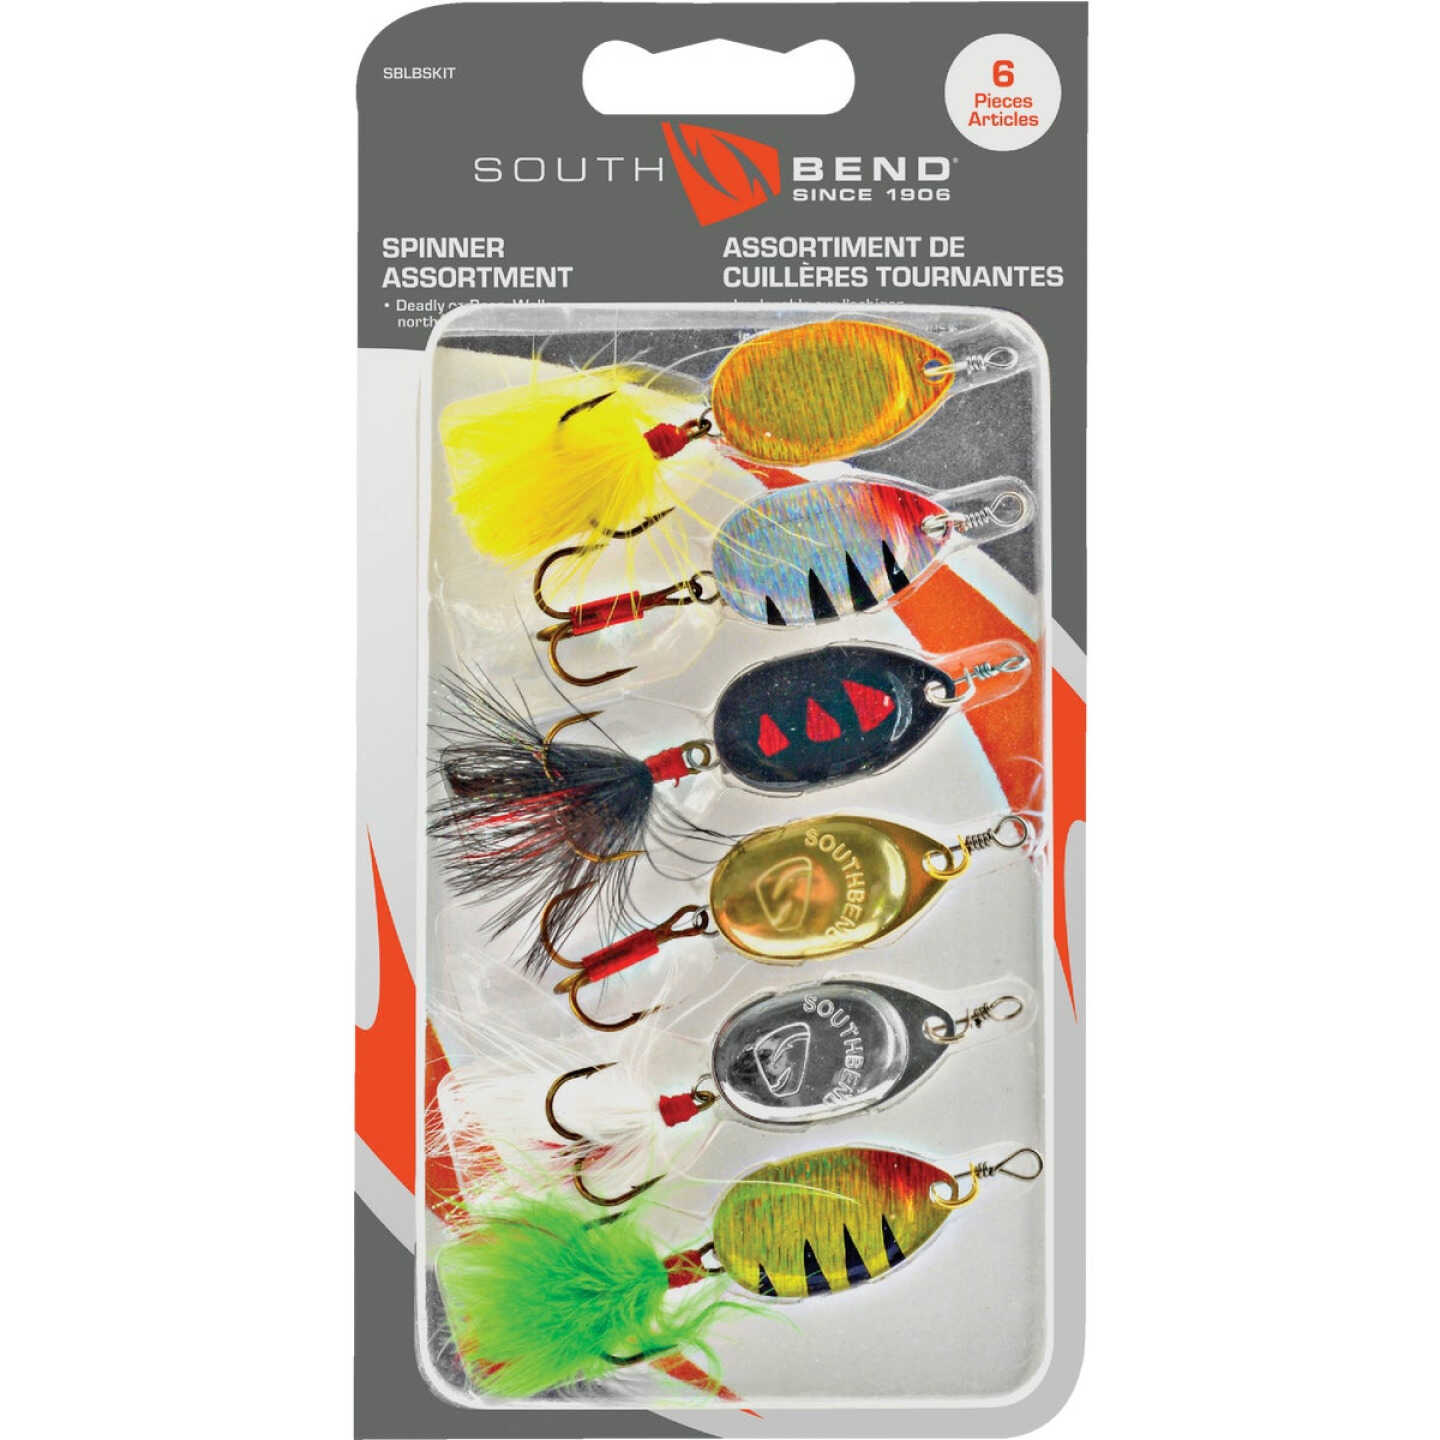 SouthBend 6-Piece Spinner Fishing Lure Kit - Dunham's